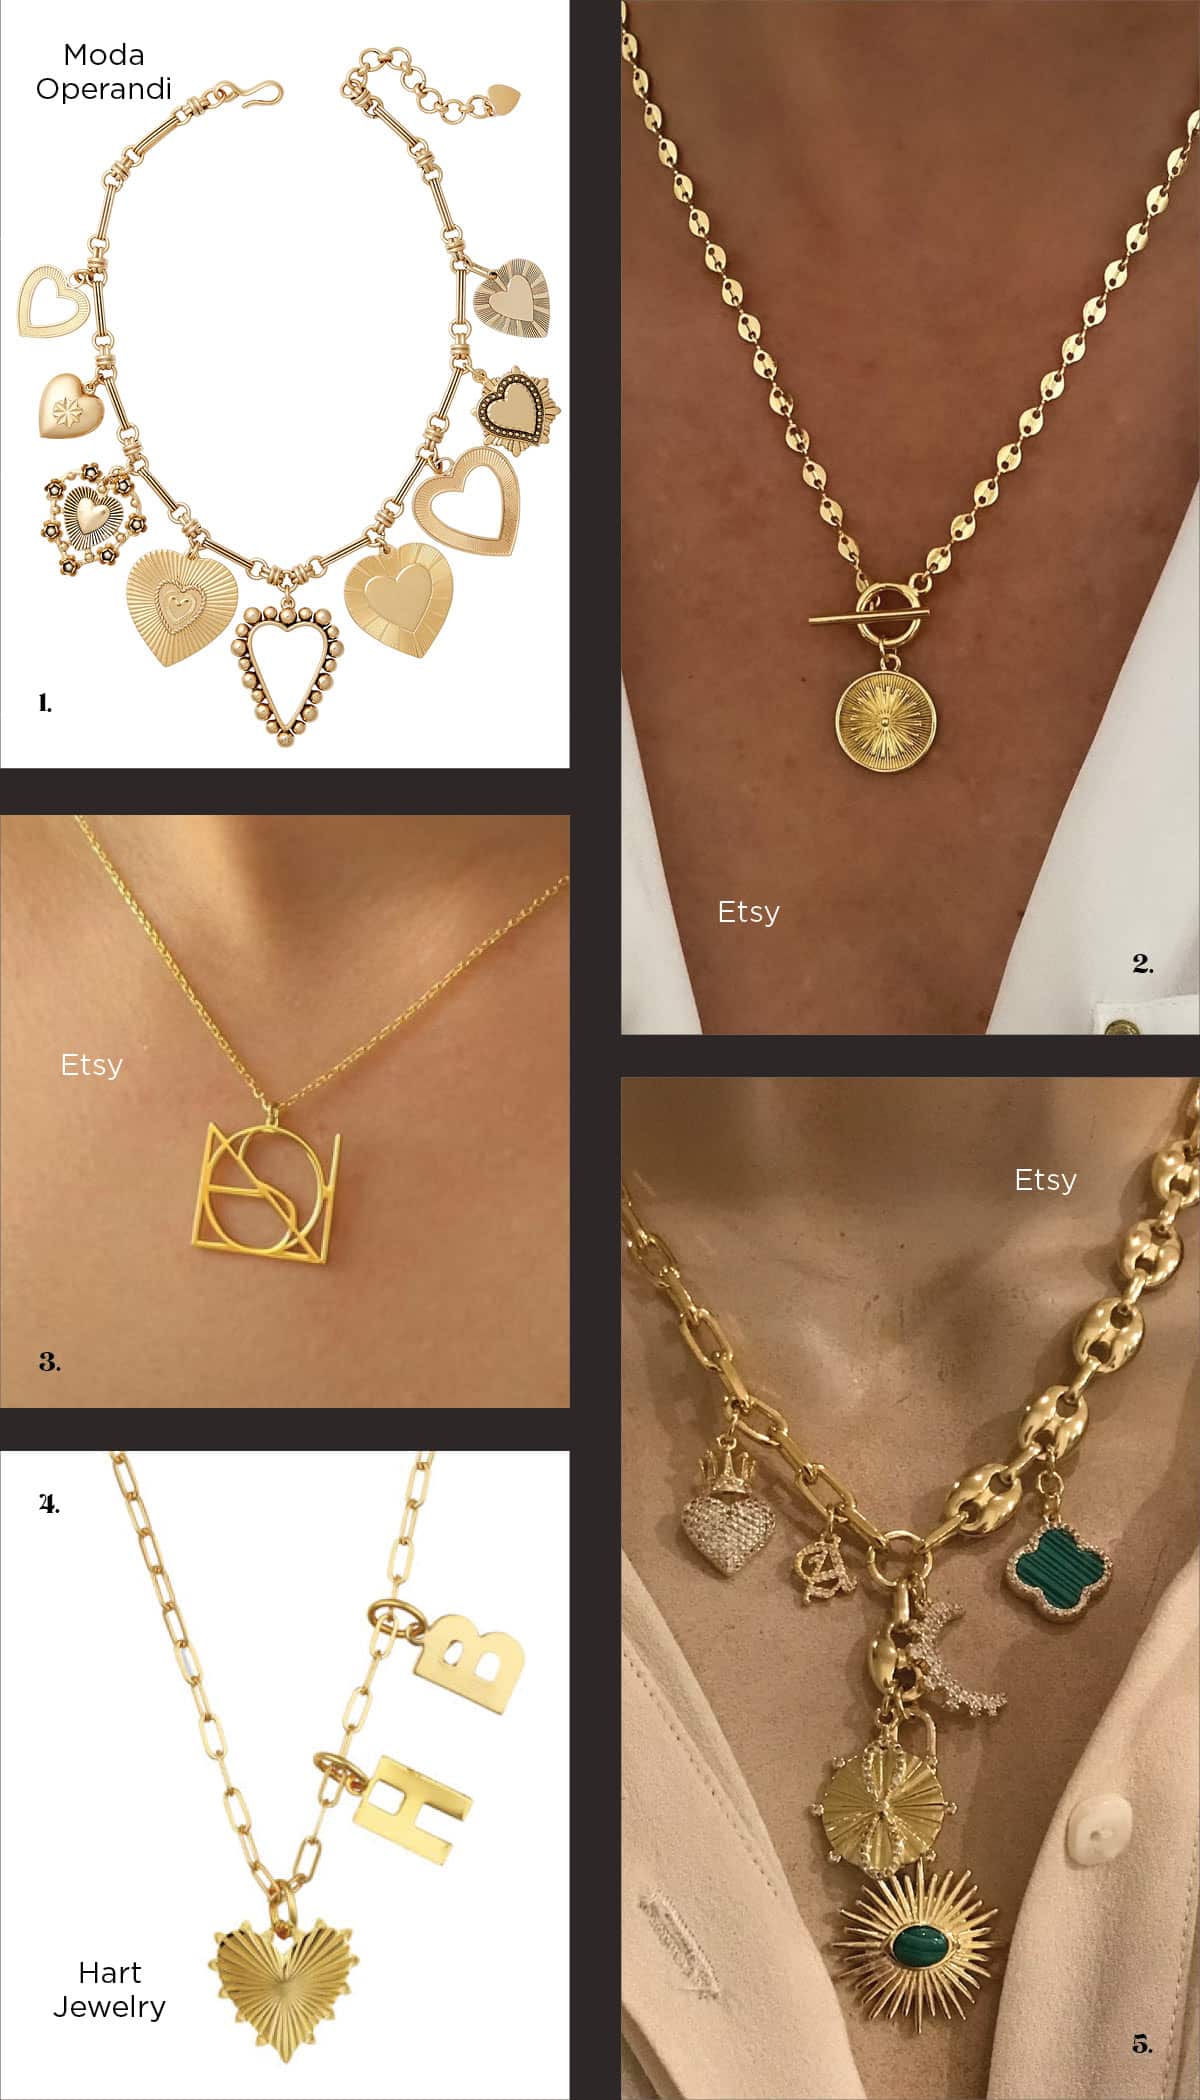 Charm Necklaces and Layered Jewelry